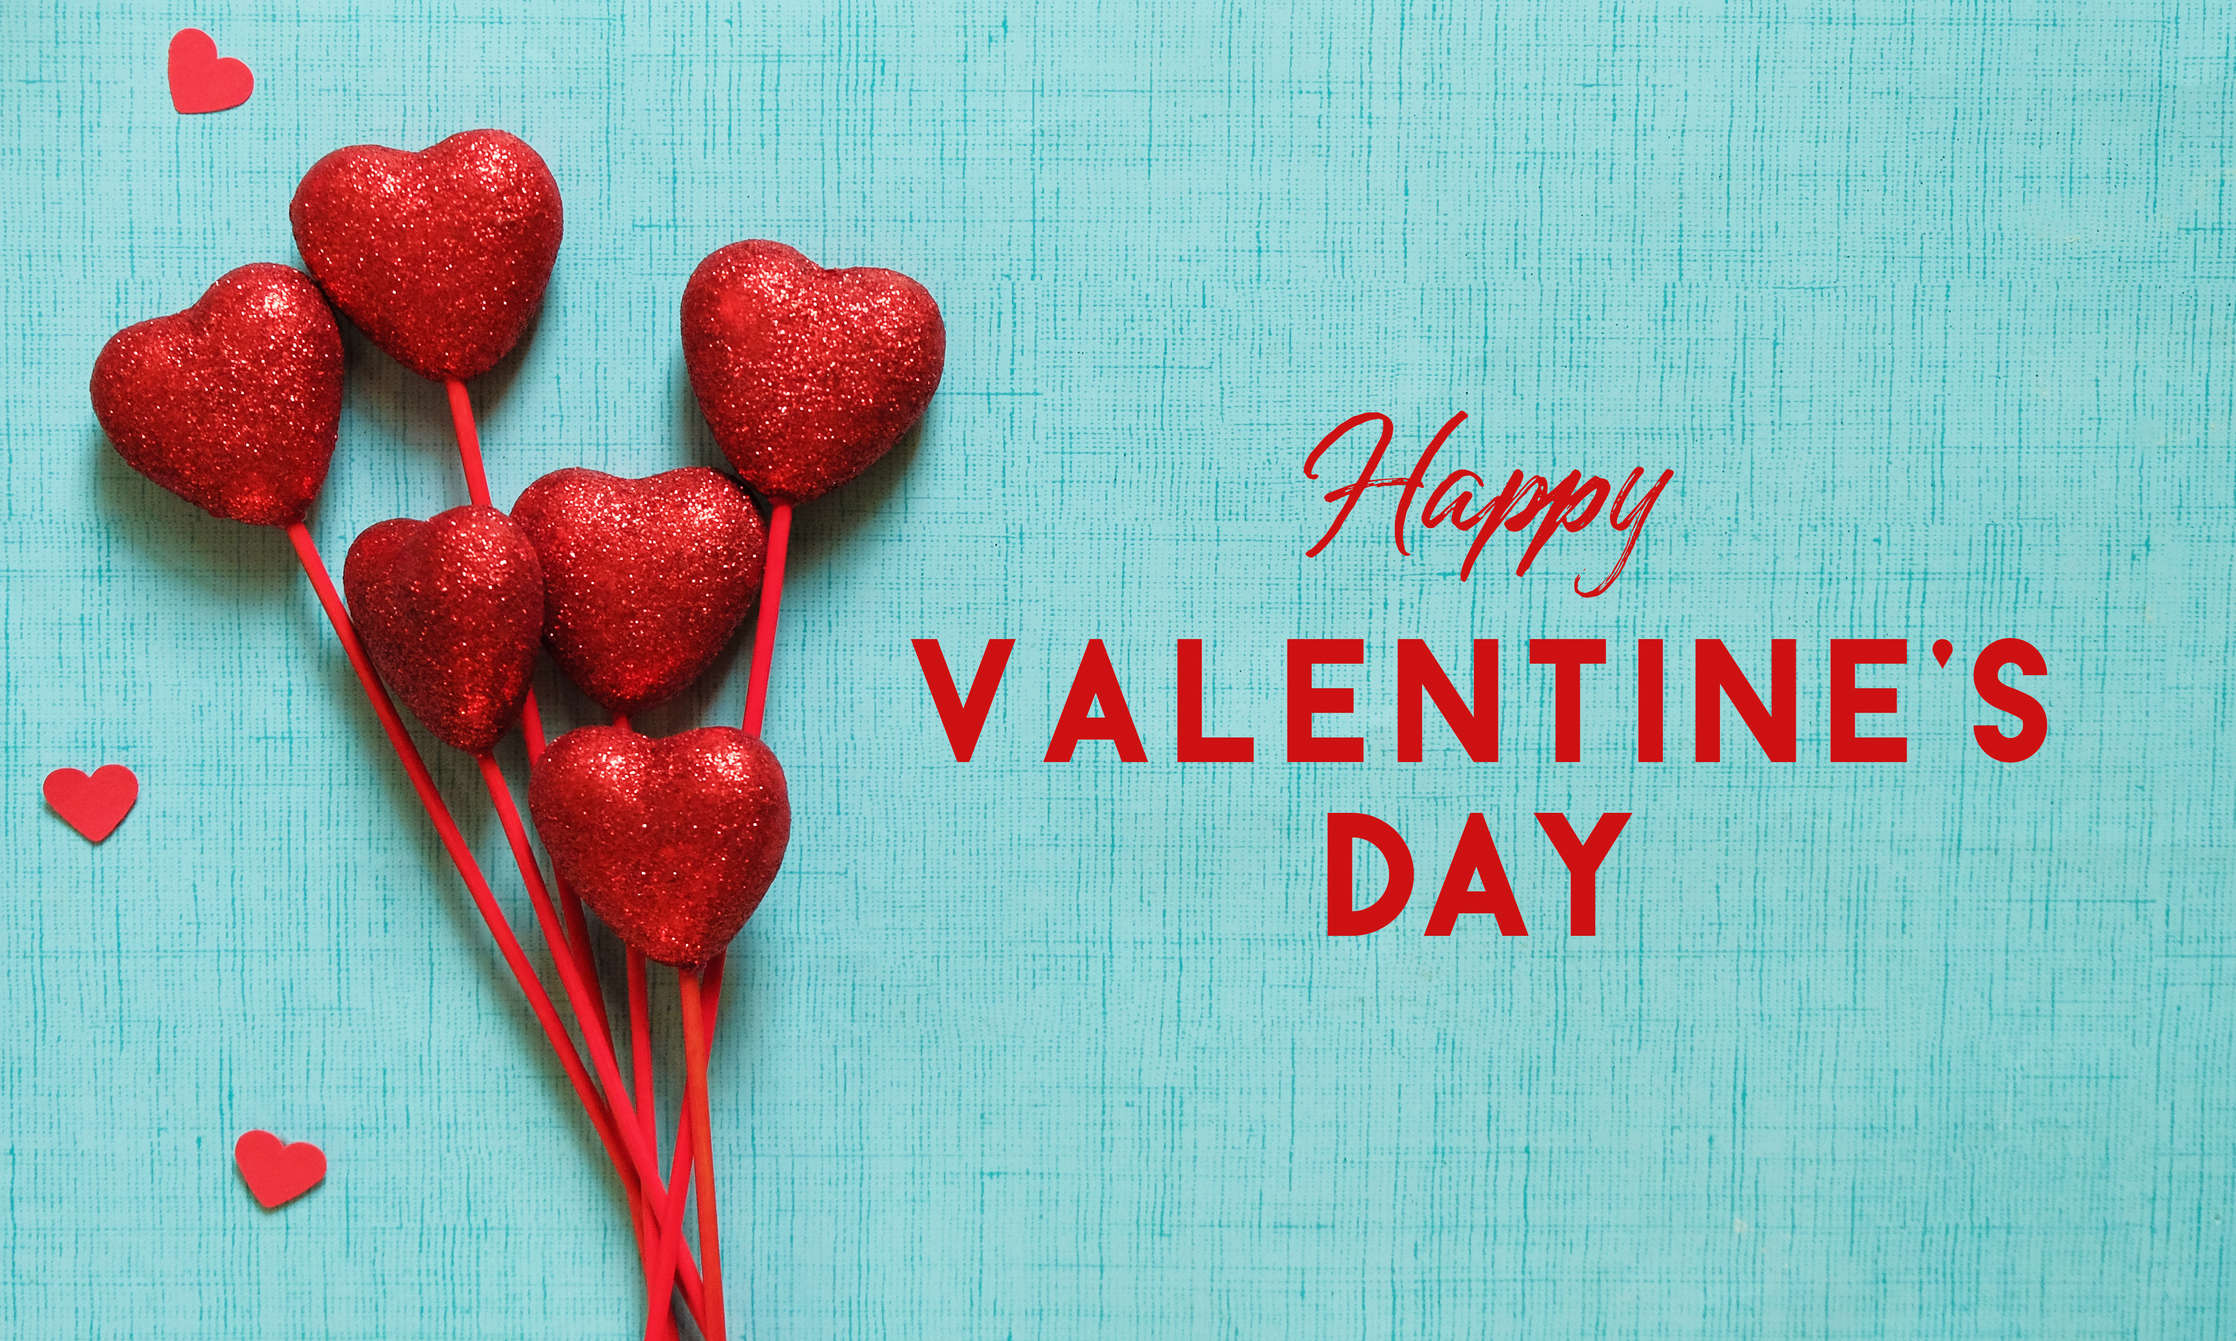 Happy Valentines Day 21 Images Quotes Wishes Messages Cards Greetings Pictures And Gifs Times Of India